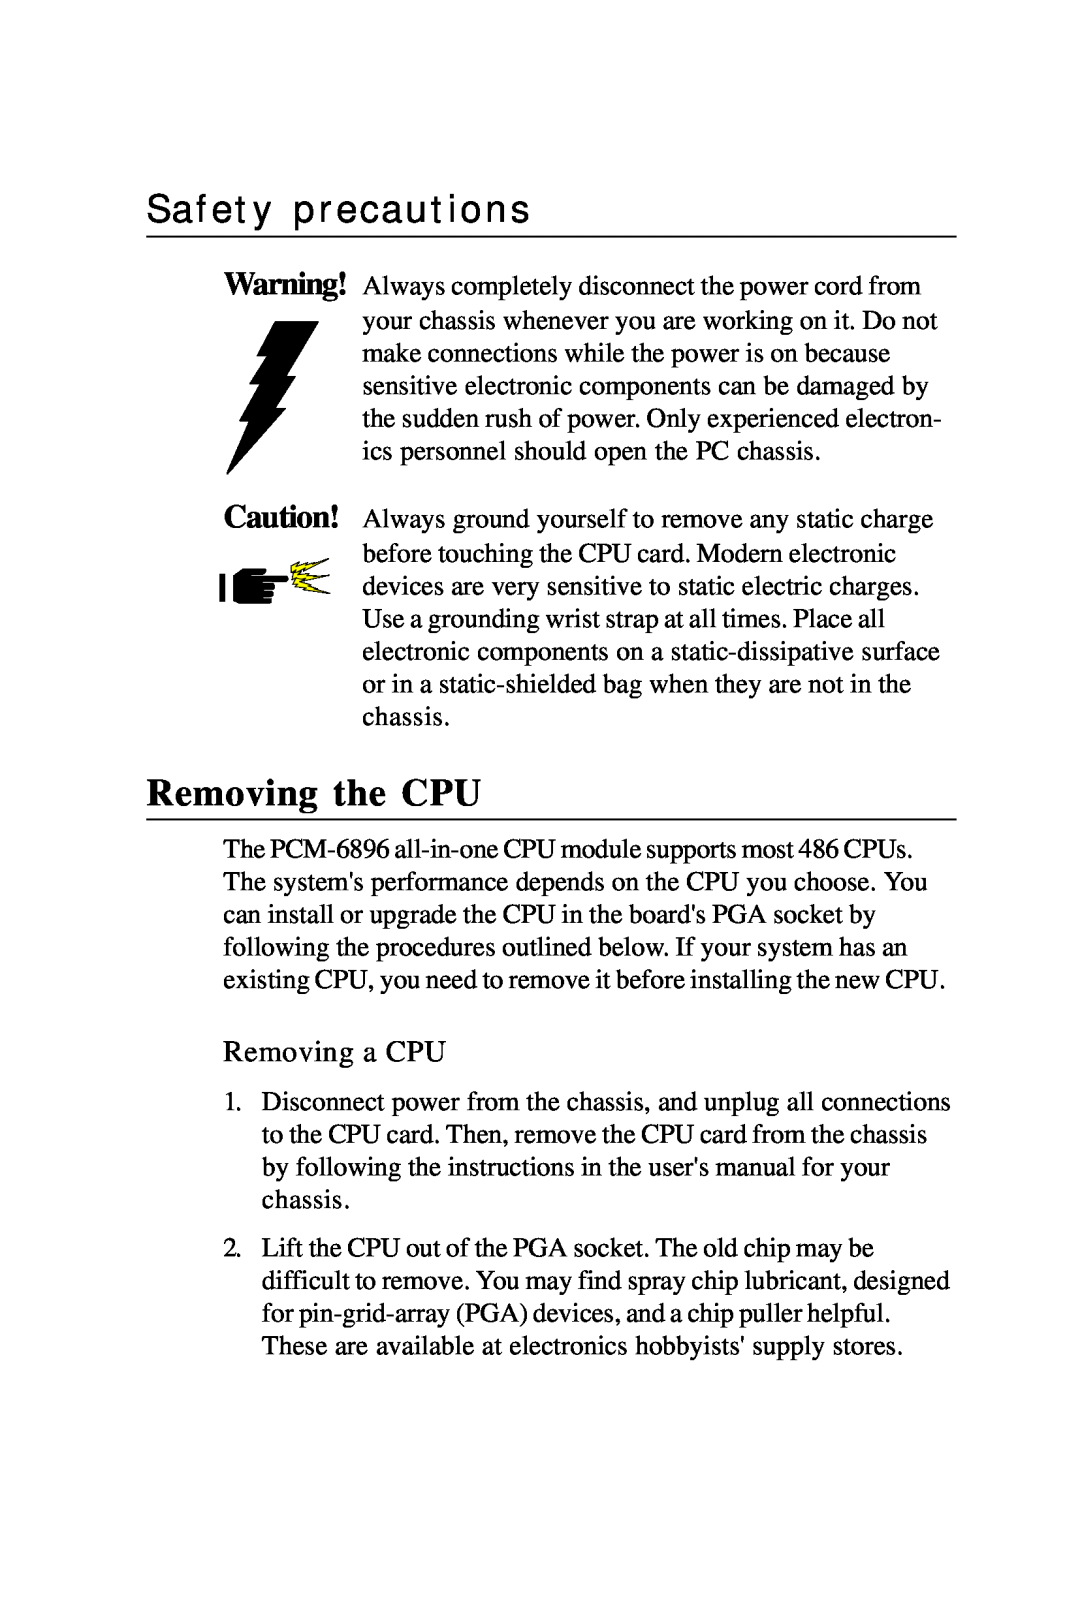 Intel PCM-6896 manual Safety precautions, Removing the CPU, Removing a CPU 